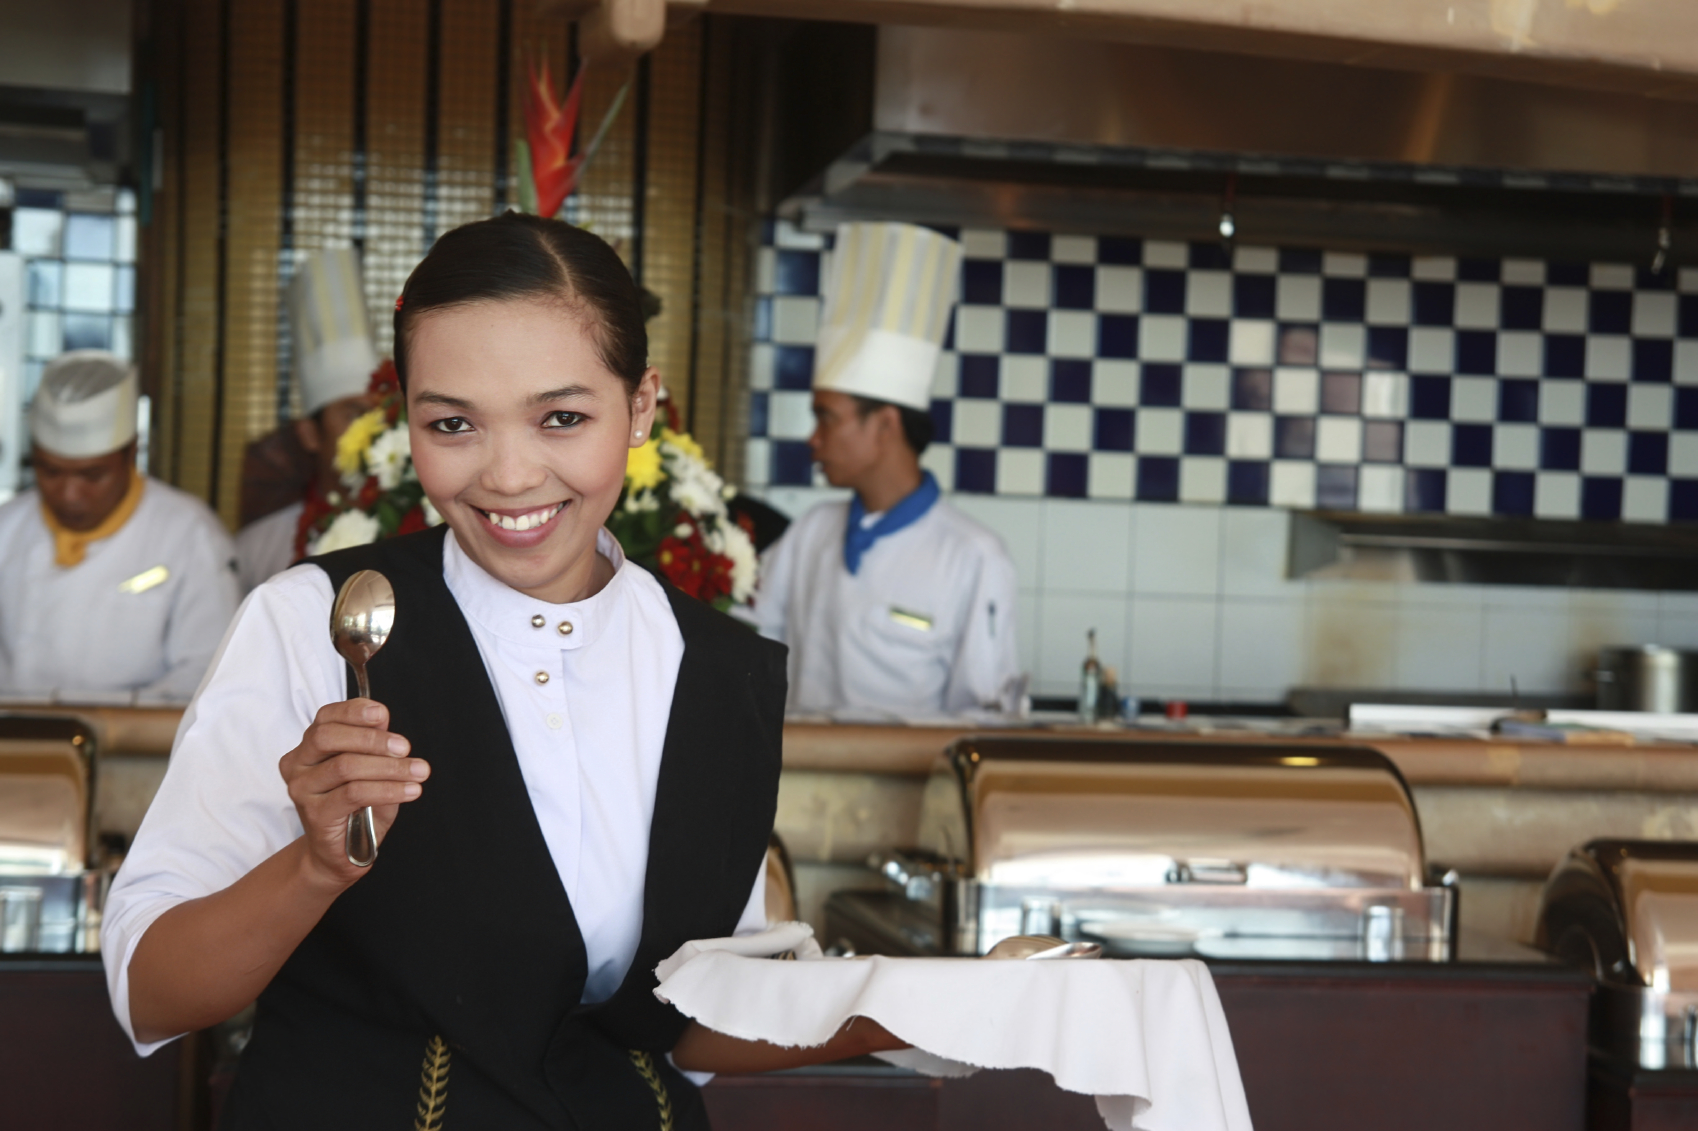 How to Hire the Right Employees for Your Restaurant